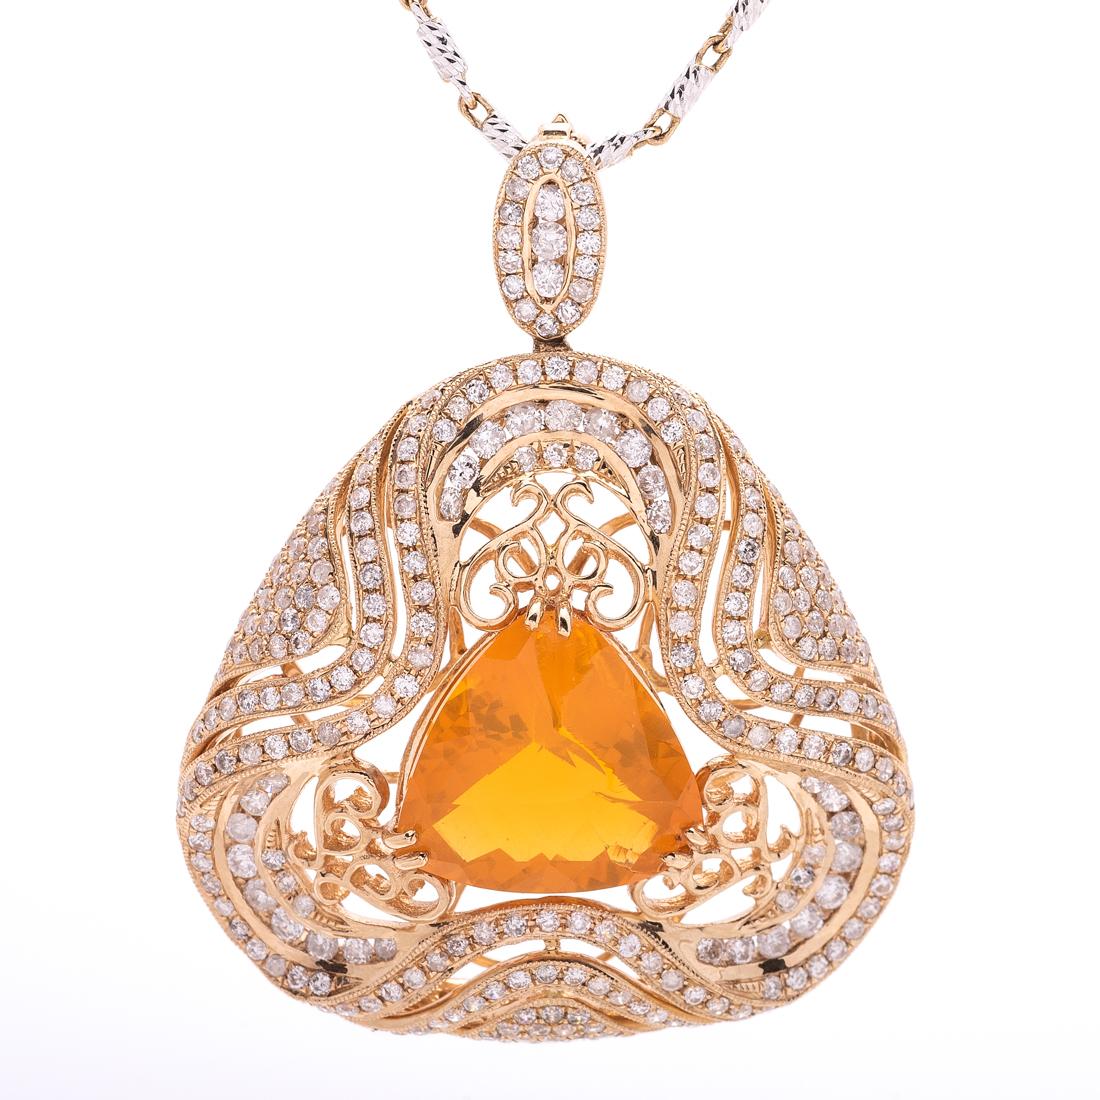 Fire Opal within an Elaborate Diamond Lattice Gallery
 274 Prong set round brilliant cut diamonds
 approximate total weight of 274 stones is 2.24 cts

